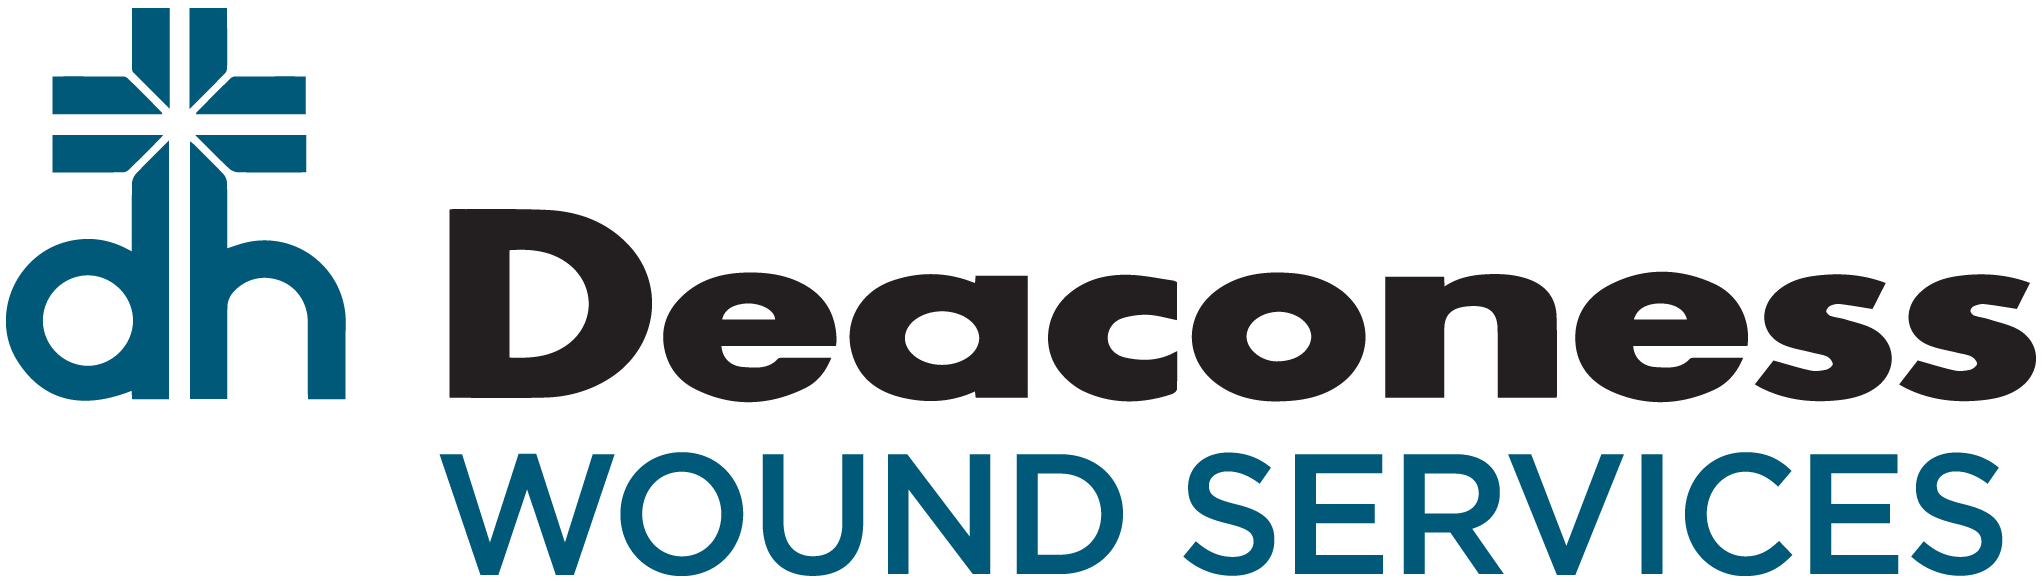 Deaconess Wound Services logo